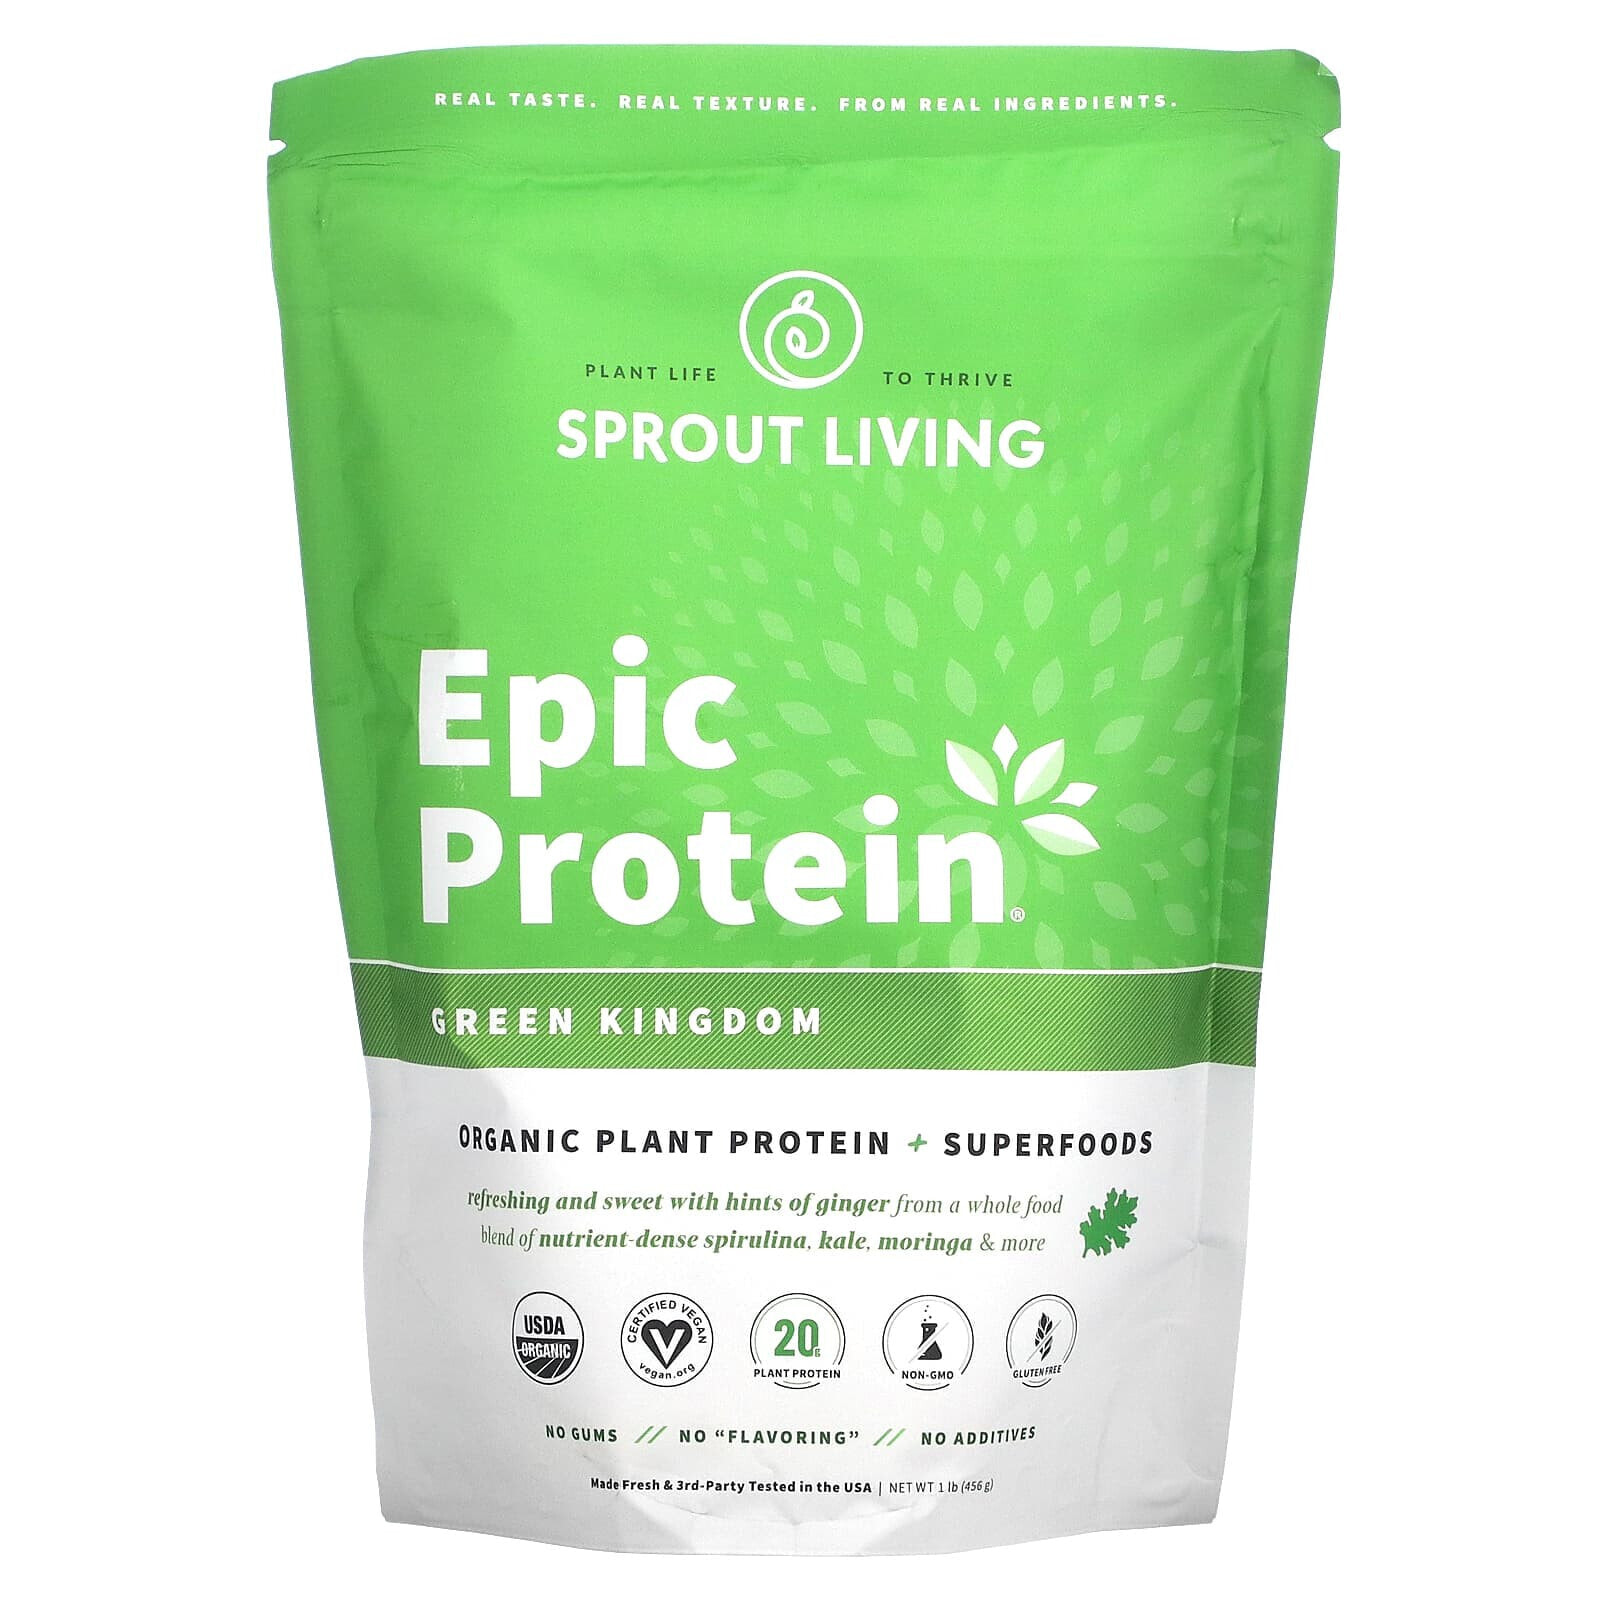 Epic Protein, Organic Plant Protein + Superfoods, Original, 1 lb (456 g)